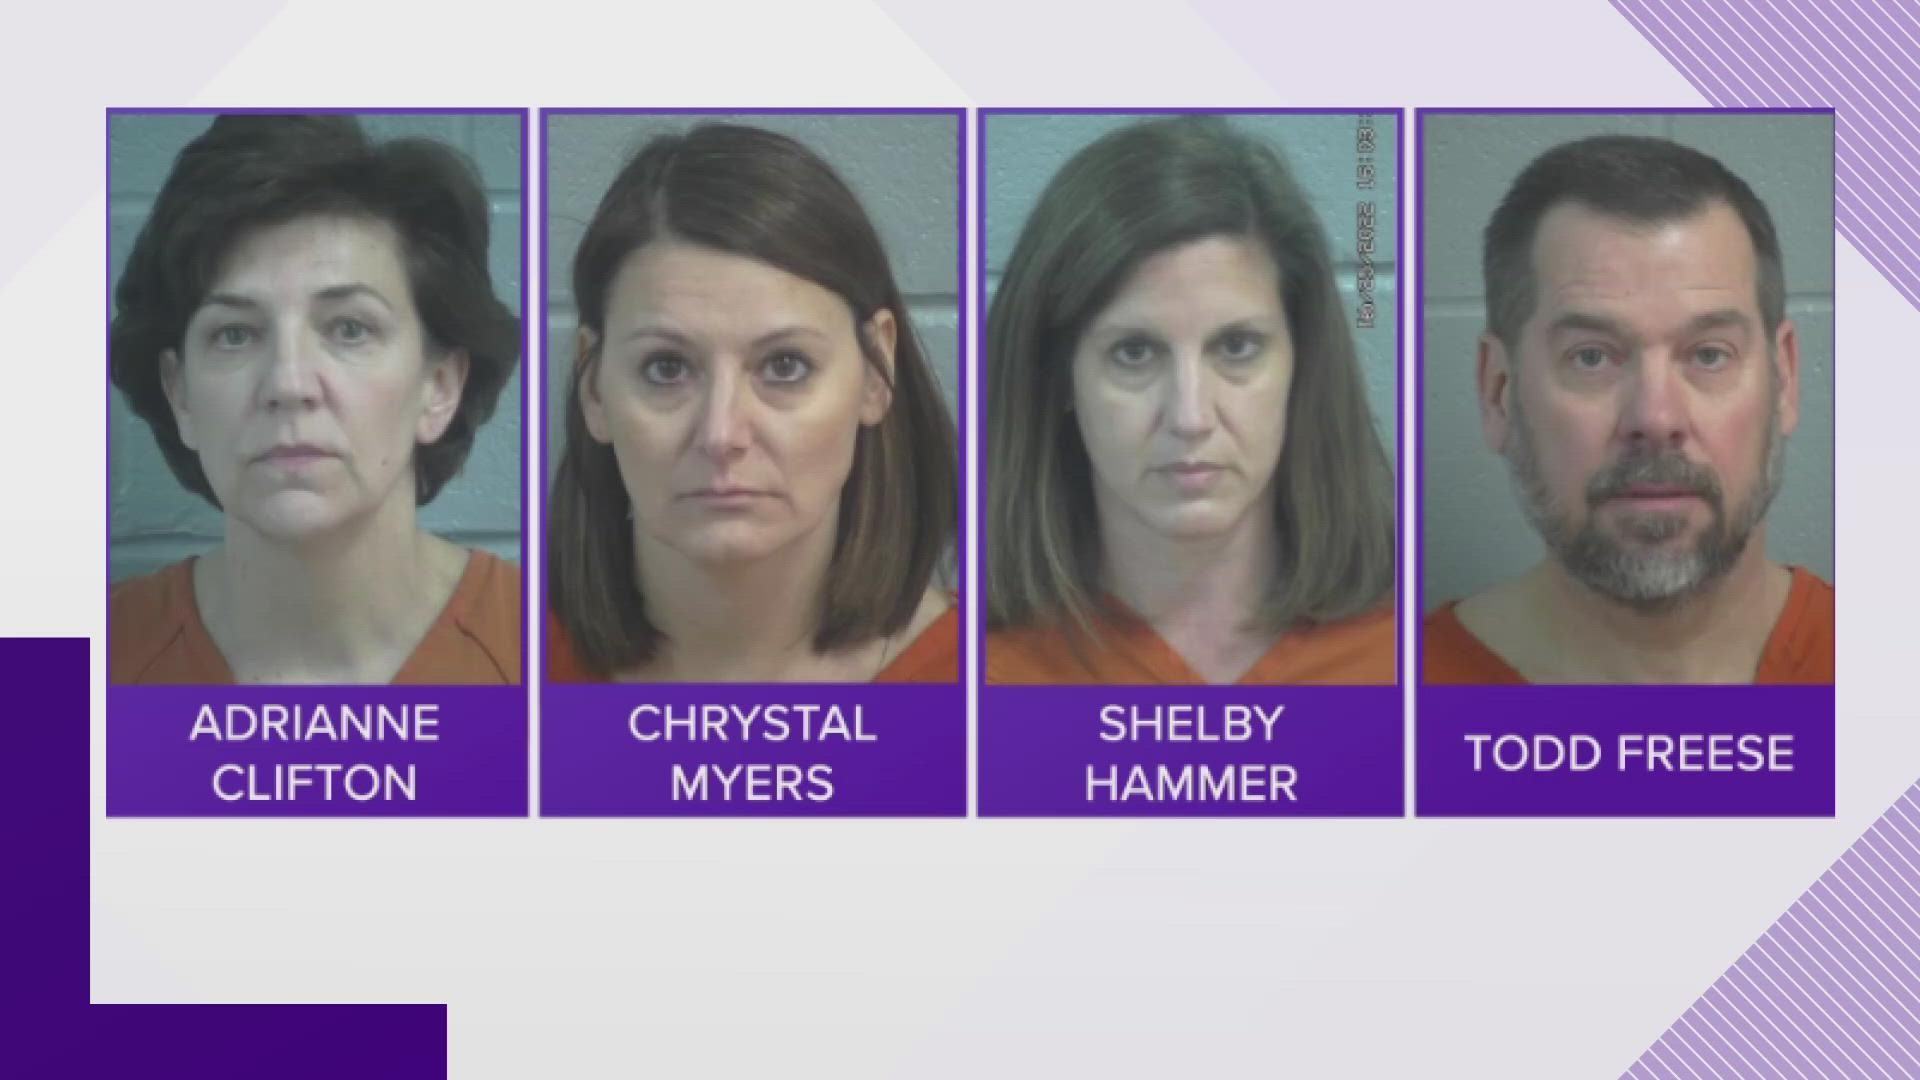 The four Trinity School administrators will appear before a jury on April 17.